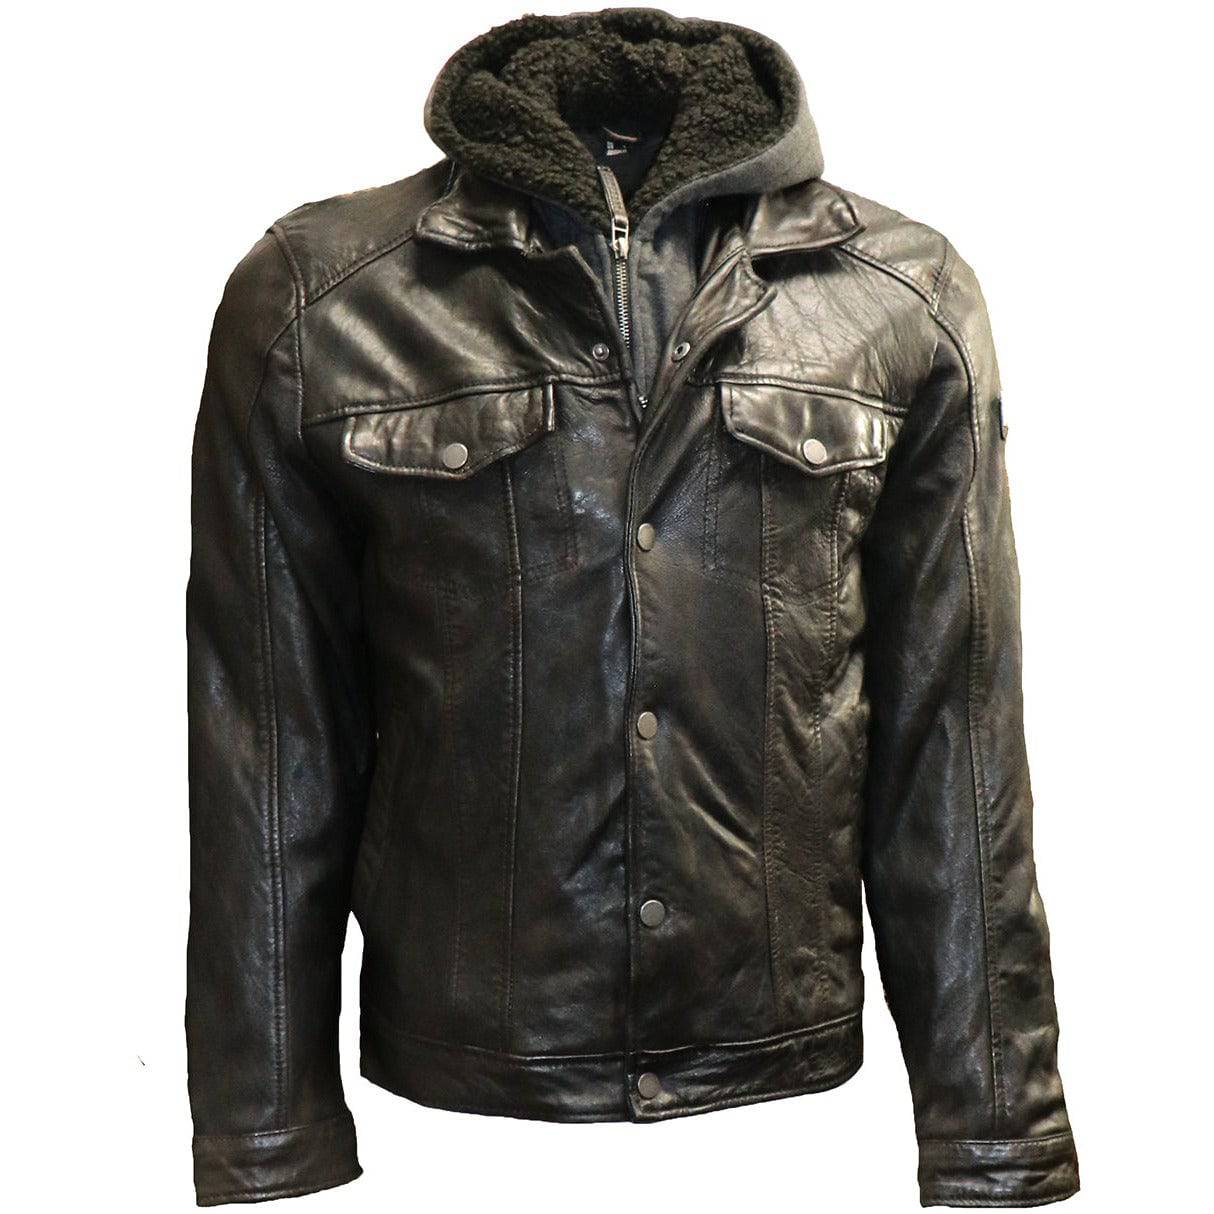 Mauritius Men's Trucker Leather Jacket with Hood - Zooloo Leather